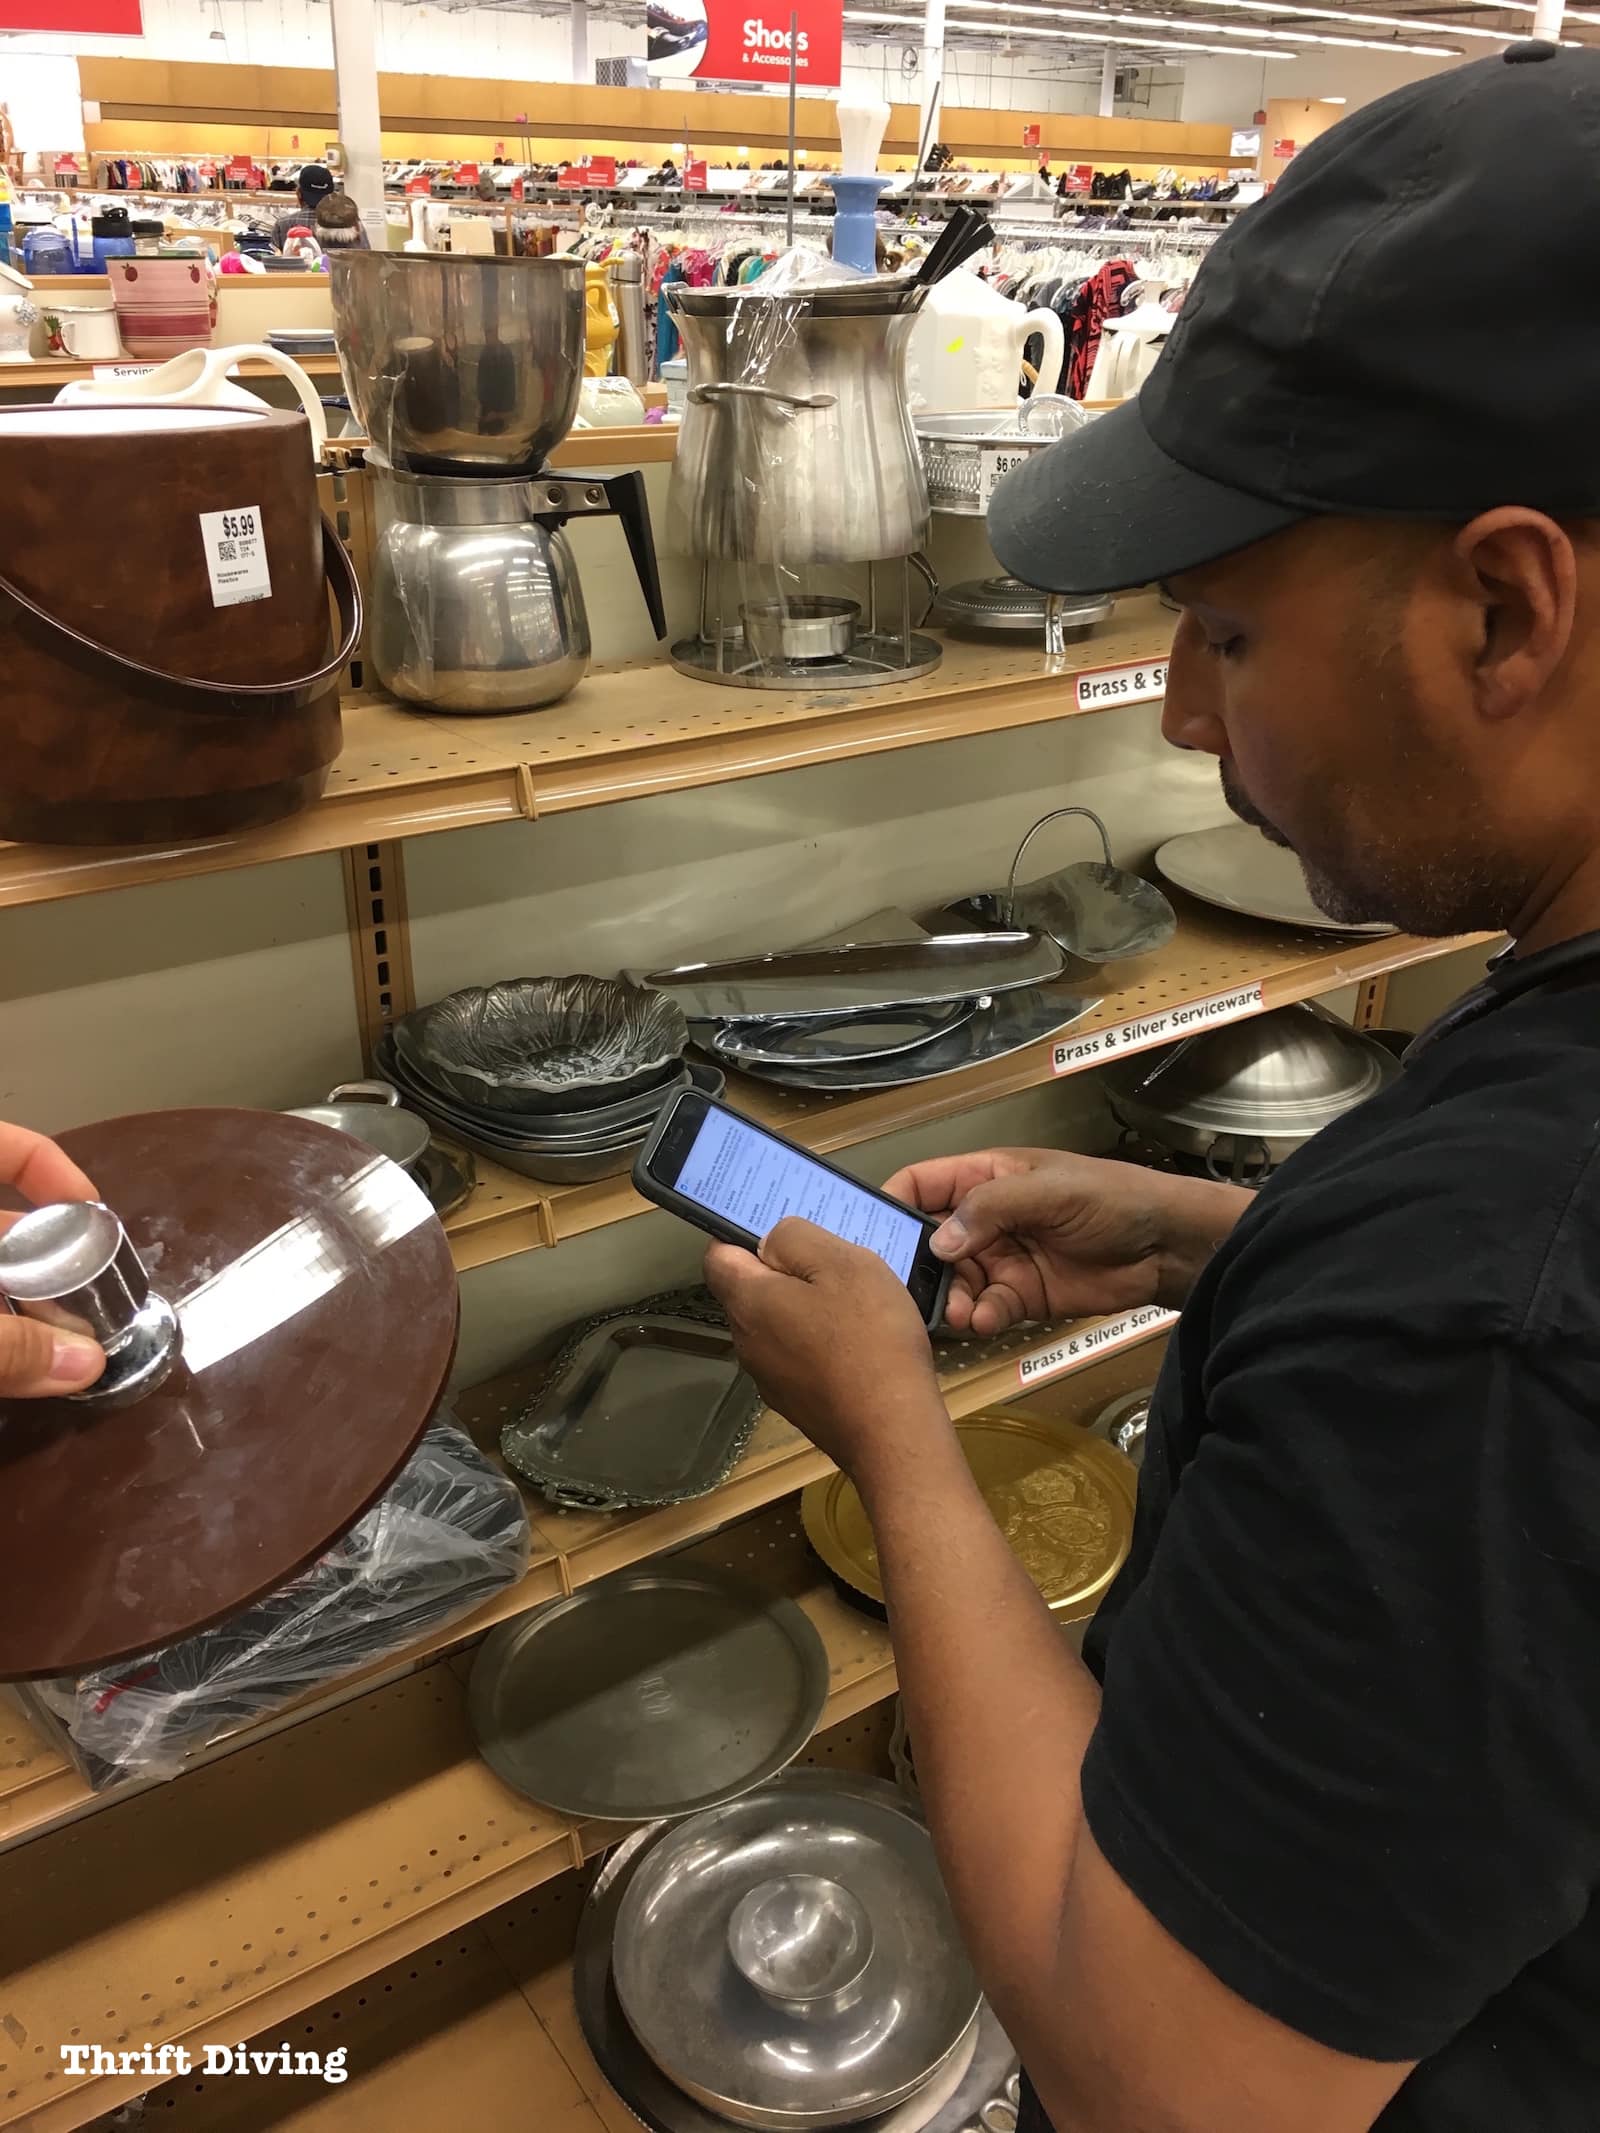 How to Shop Thrift Stores - Use your phone to search for value. - Thrift Diving